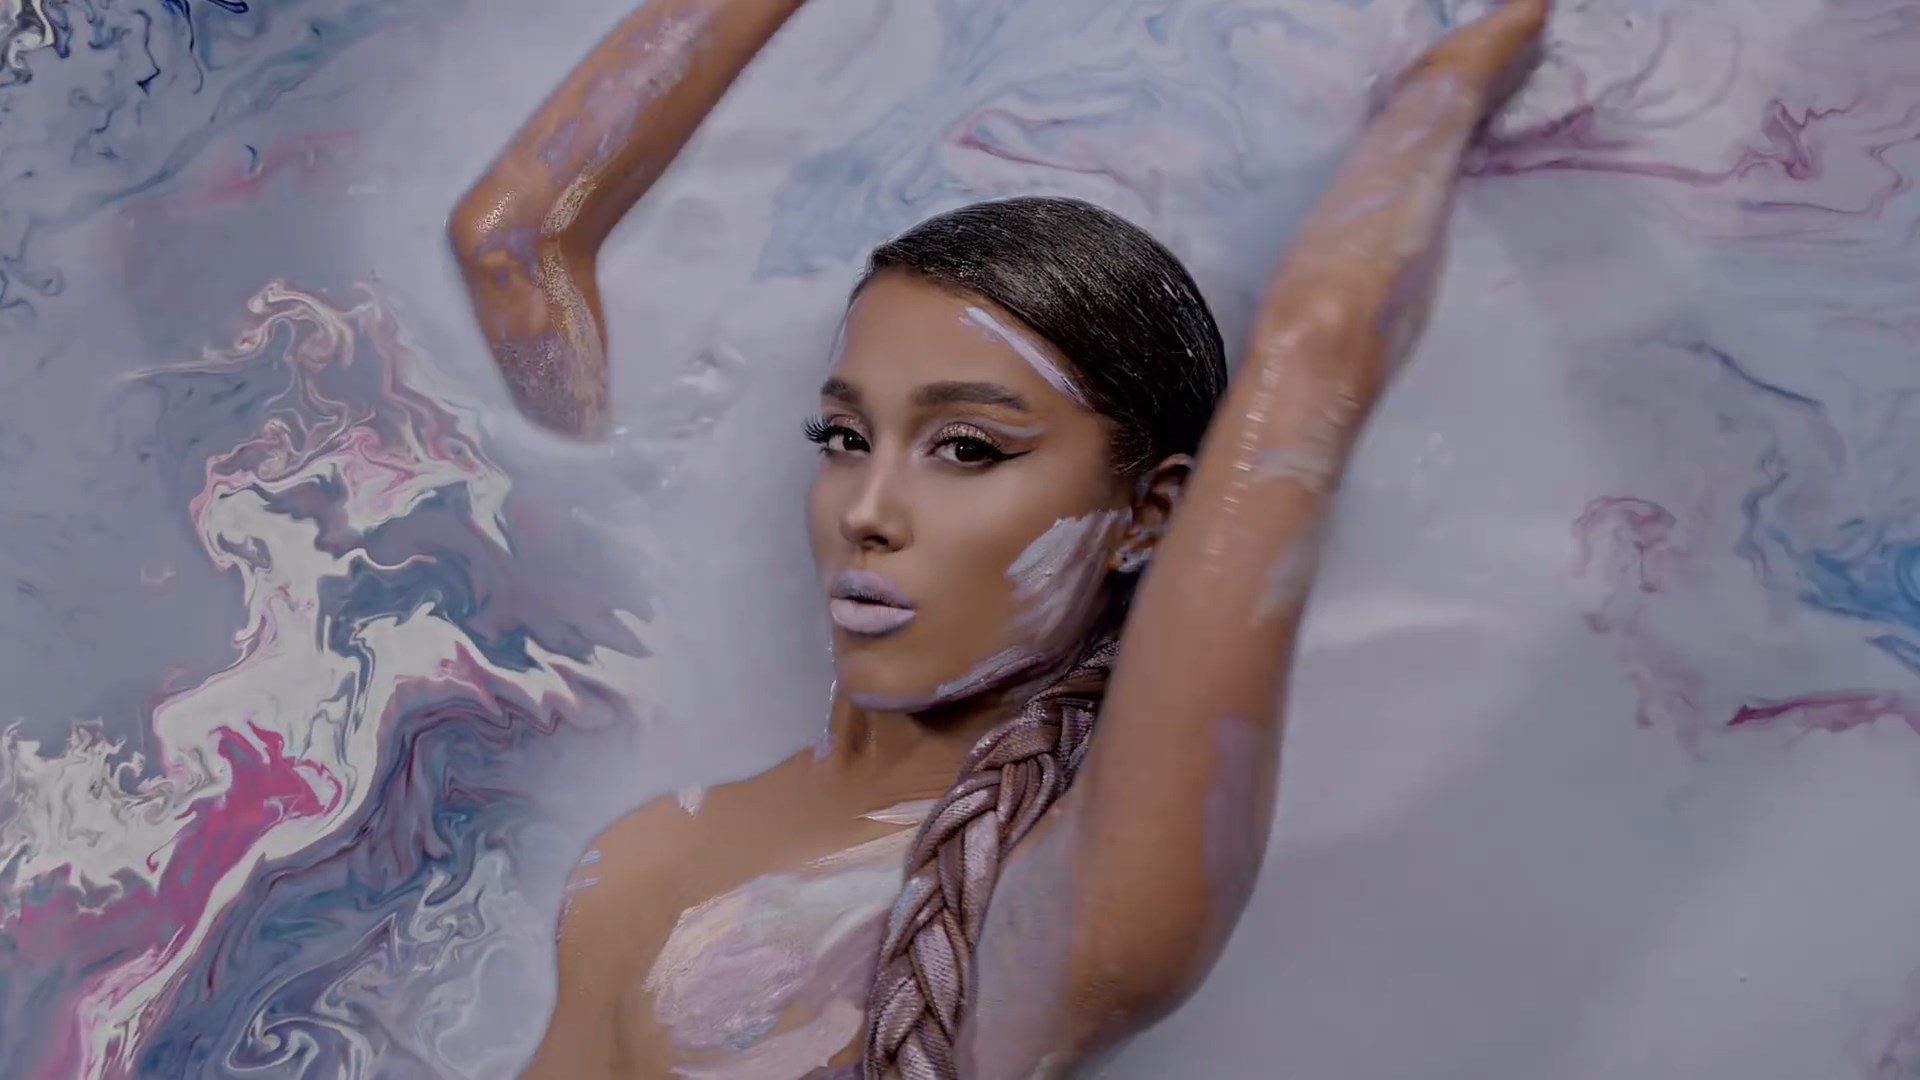 Ariana Grande Nearly Naked in God is a Woman Video 